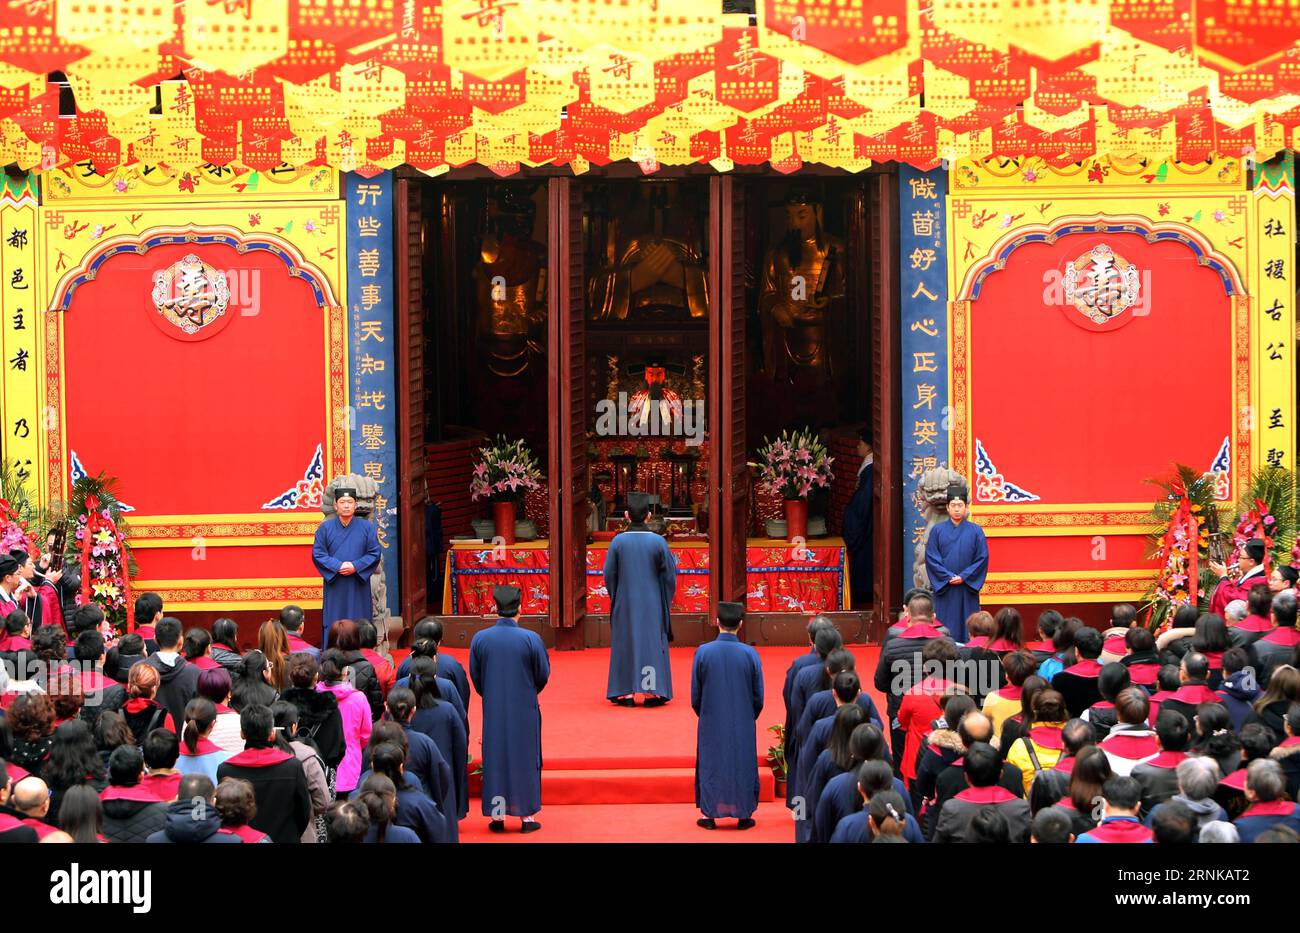 (170318) -- SHANGHAI, March 18, 2017 -- A ceremony is held in the Chenghuang temple (The City Temple of Shanghai) wishing for city s prosperity in Shanghai, east China, March 18, 2017. ) (zyd) CHINA-SHANGHAI-CHENGHUANG-CEREMONY (CN) LiuxYing PUBLICATIONxNOTxINxCHN   Shanghai March 18 2017 a Ceremony IS Hero in The Cheng Huang Temple The City Temple of Shanghai Wishing for City S Prosperity in Shanghai East China March 18 2017 ZYD China Shanghai Cheng Huang Ceremony CN LiuxYing PUBLICATIONxNOTxINxCHN Stock Photo